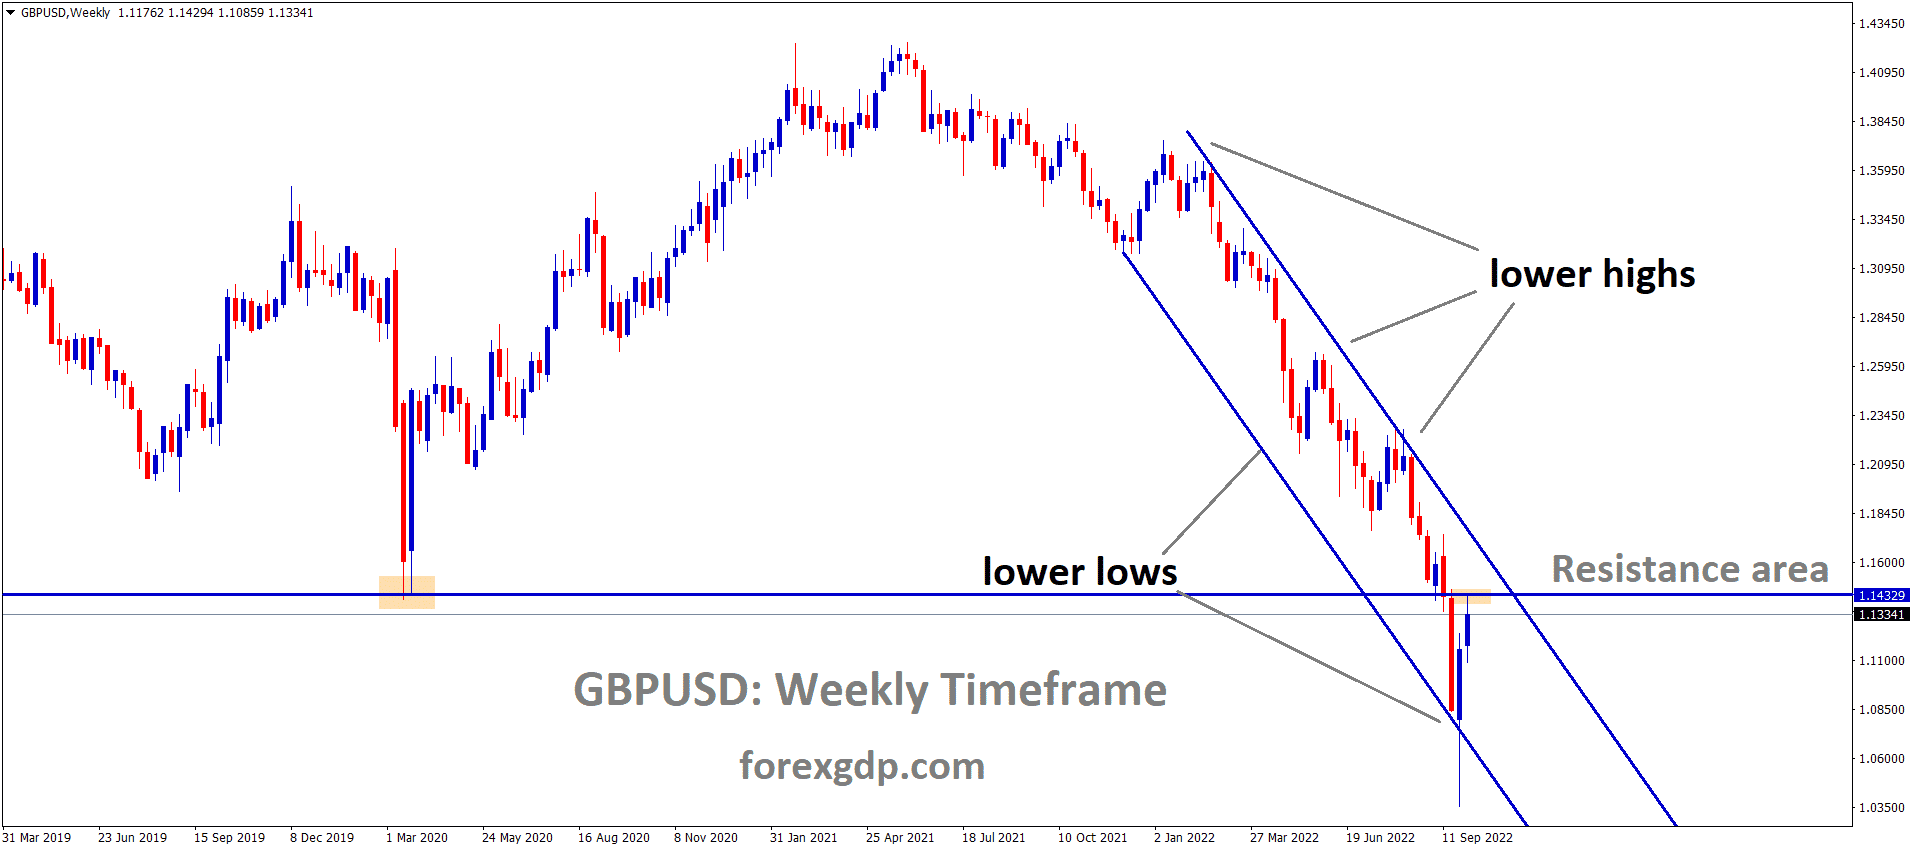 GBPUSD is moving in the descending channel and the market has rebounded from the lower low area and reached the Resistance area of the channel